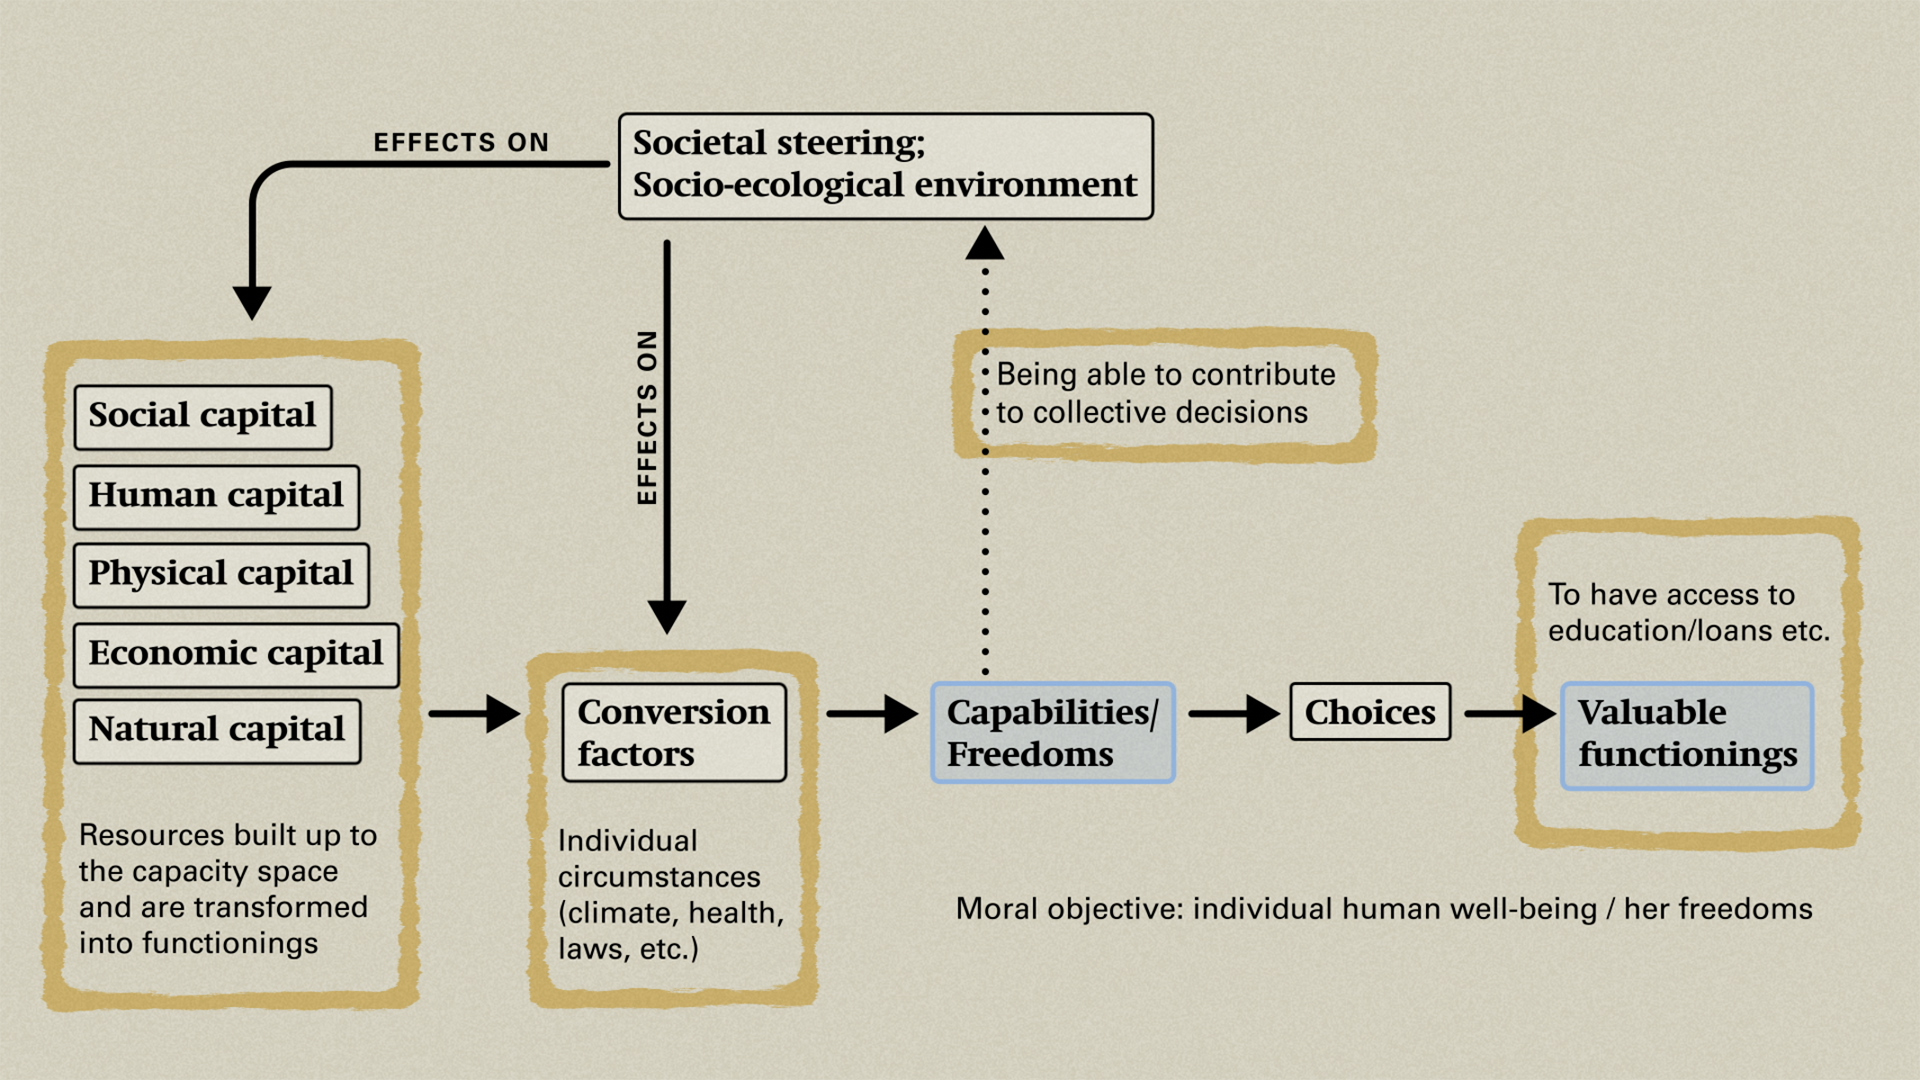 Diagram 2 shows the structural elements of the capability approach using five types of capitals as relevant input factors.